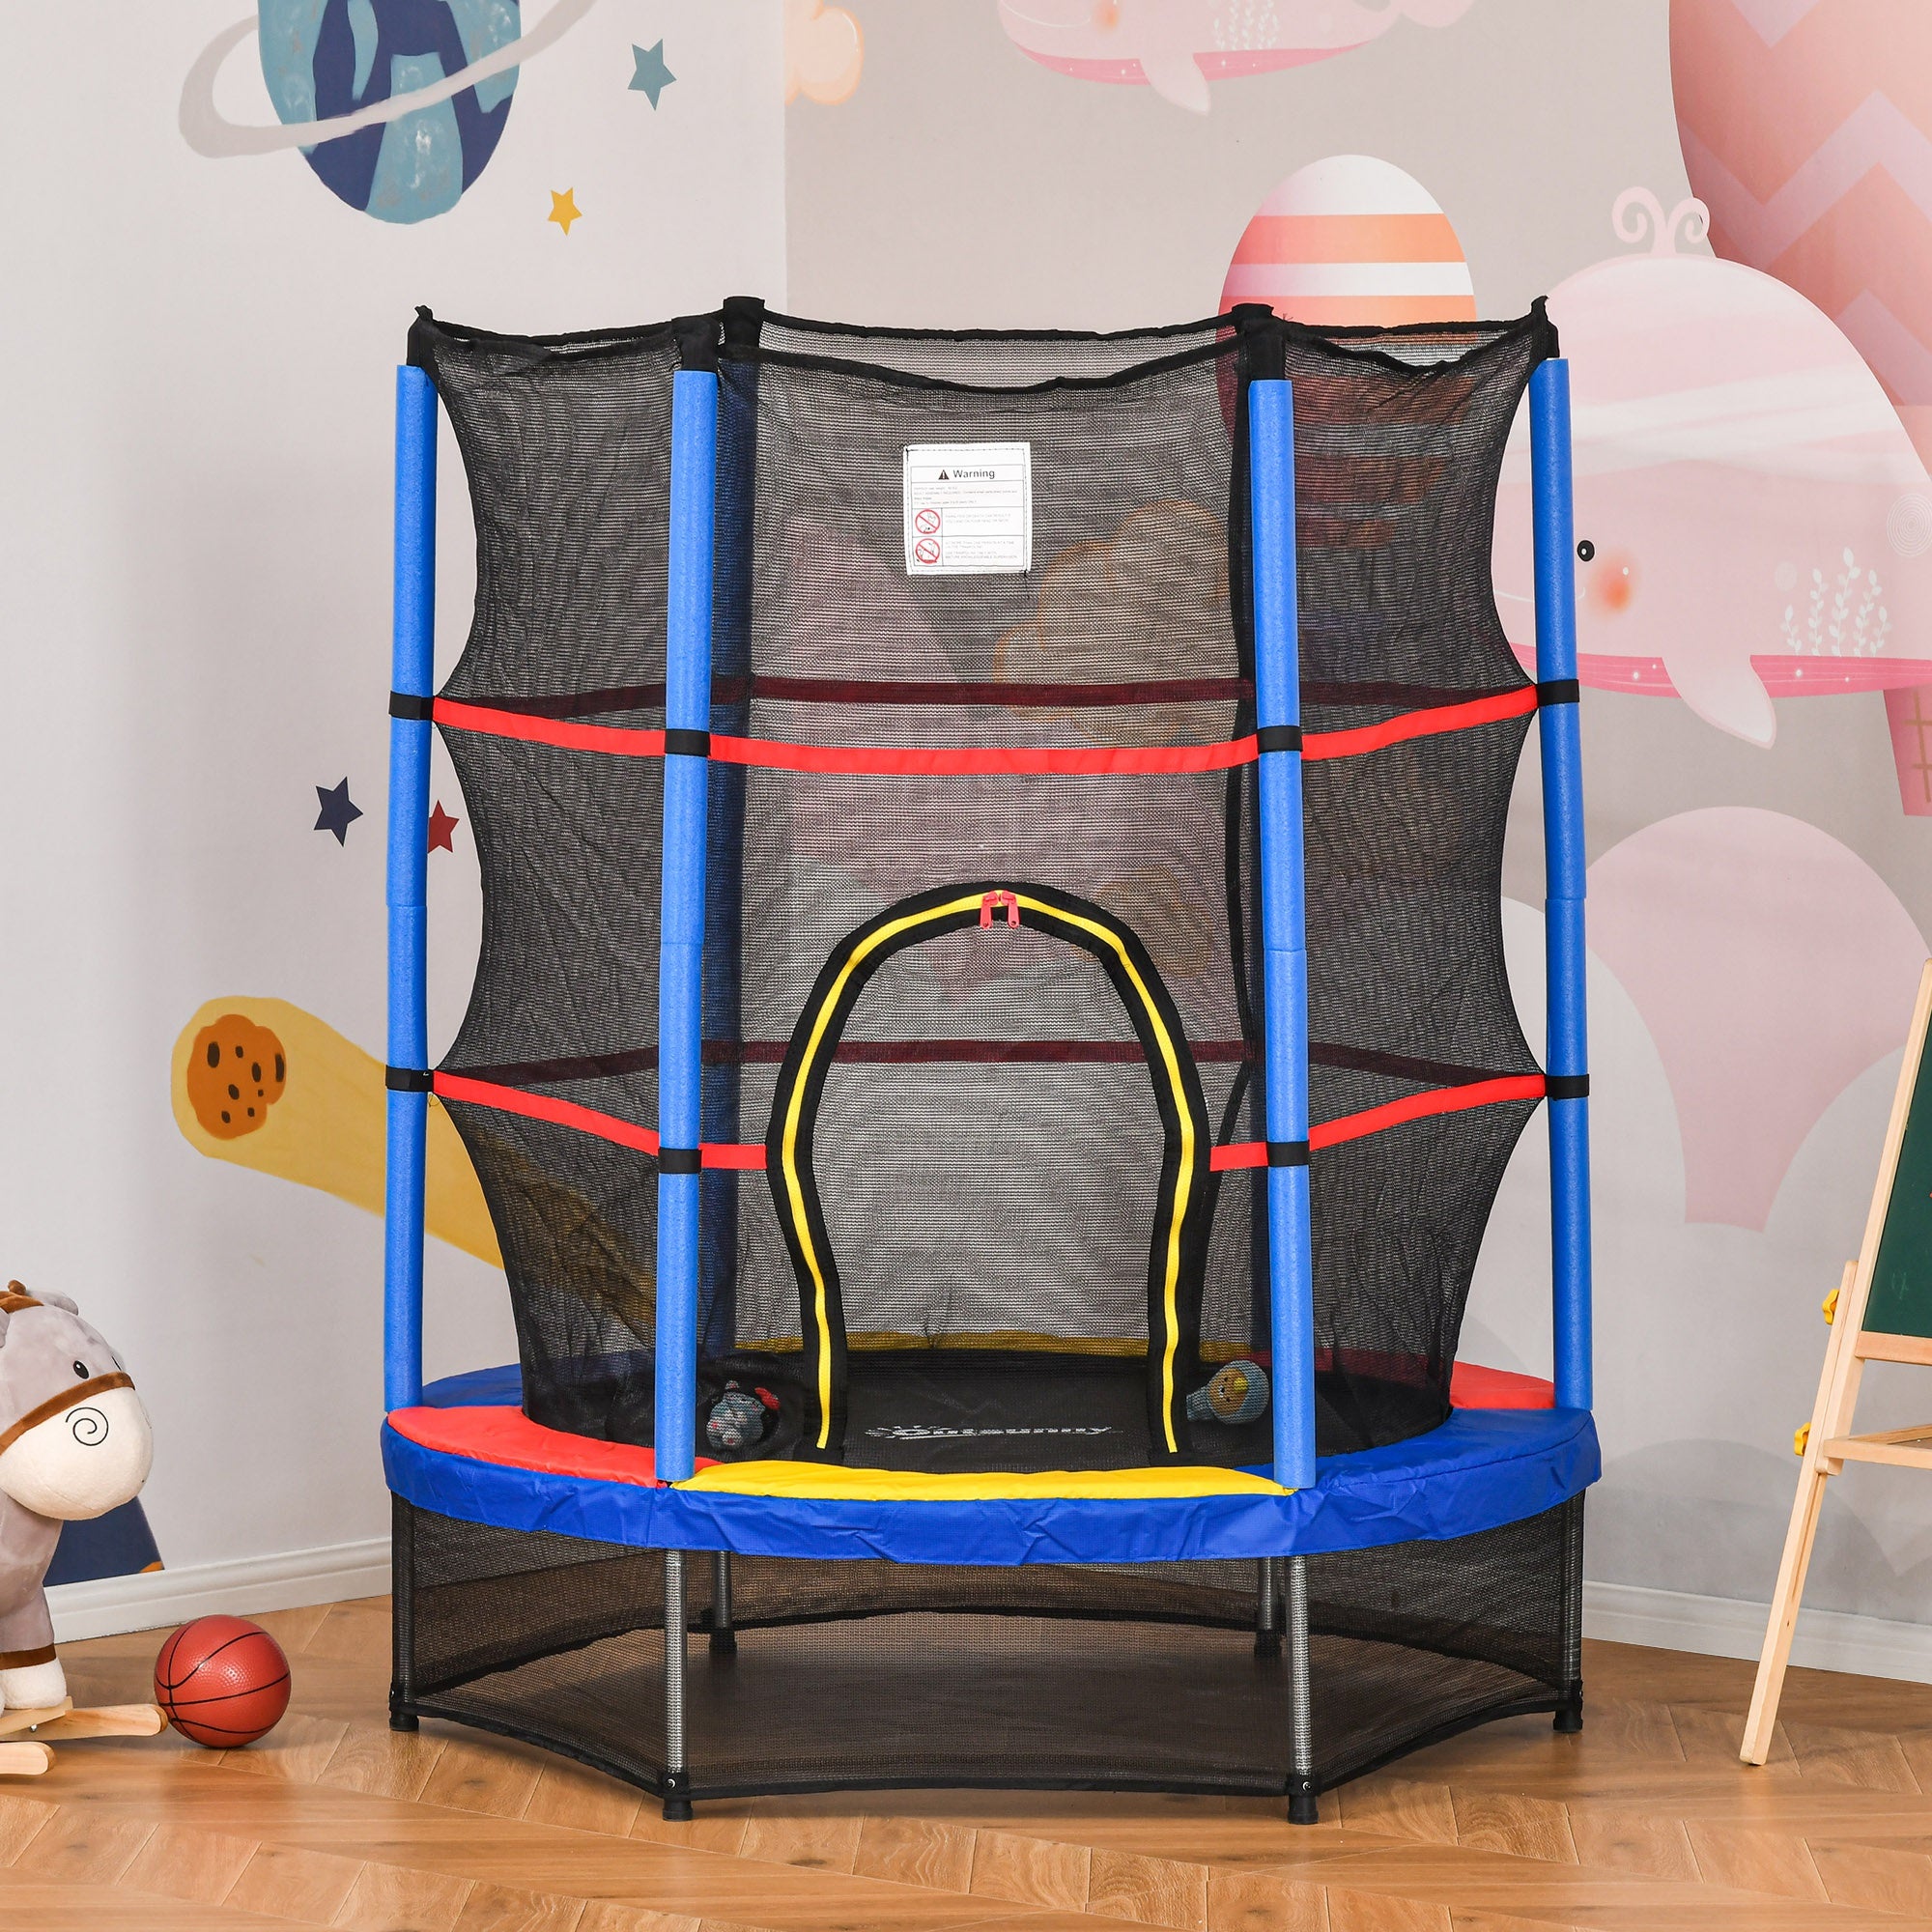 HOMCOM 5.2FT/63 Inch Kids Trampoline with Enclosure Net Steel Frame Indoor Round Bouncer Rebounder Age 3 to 6 Years Old Multi-color - Inspirely